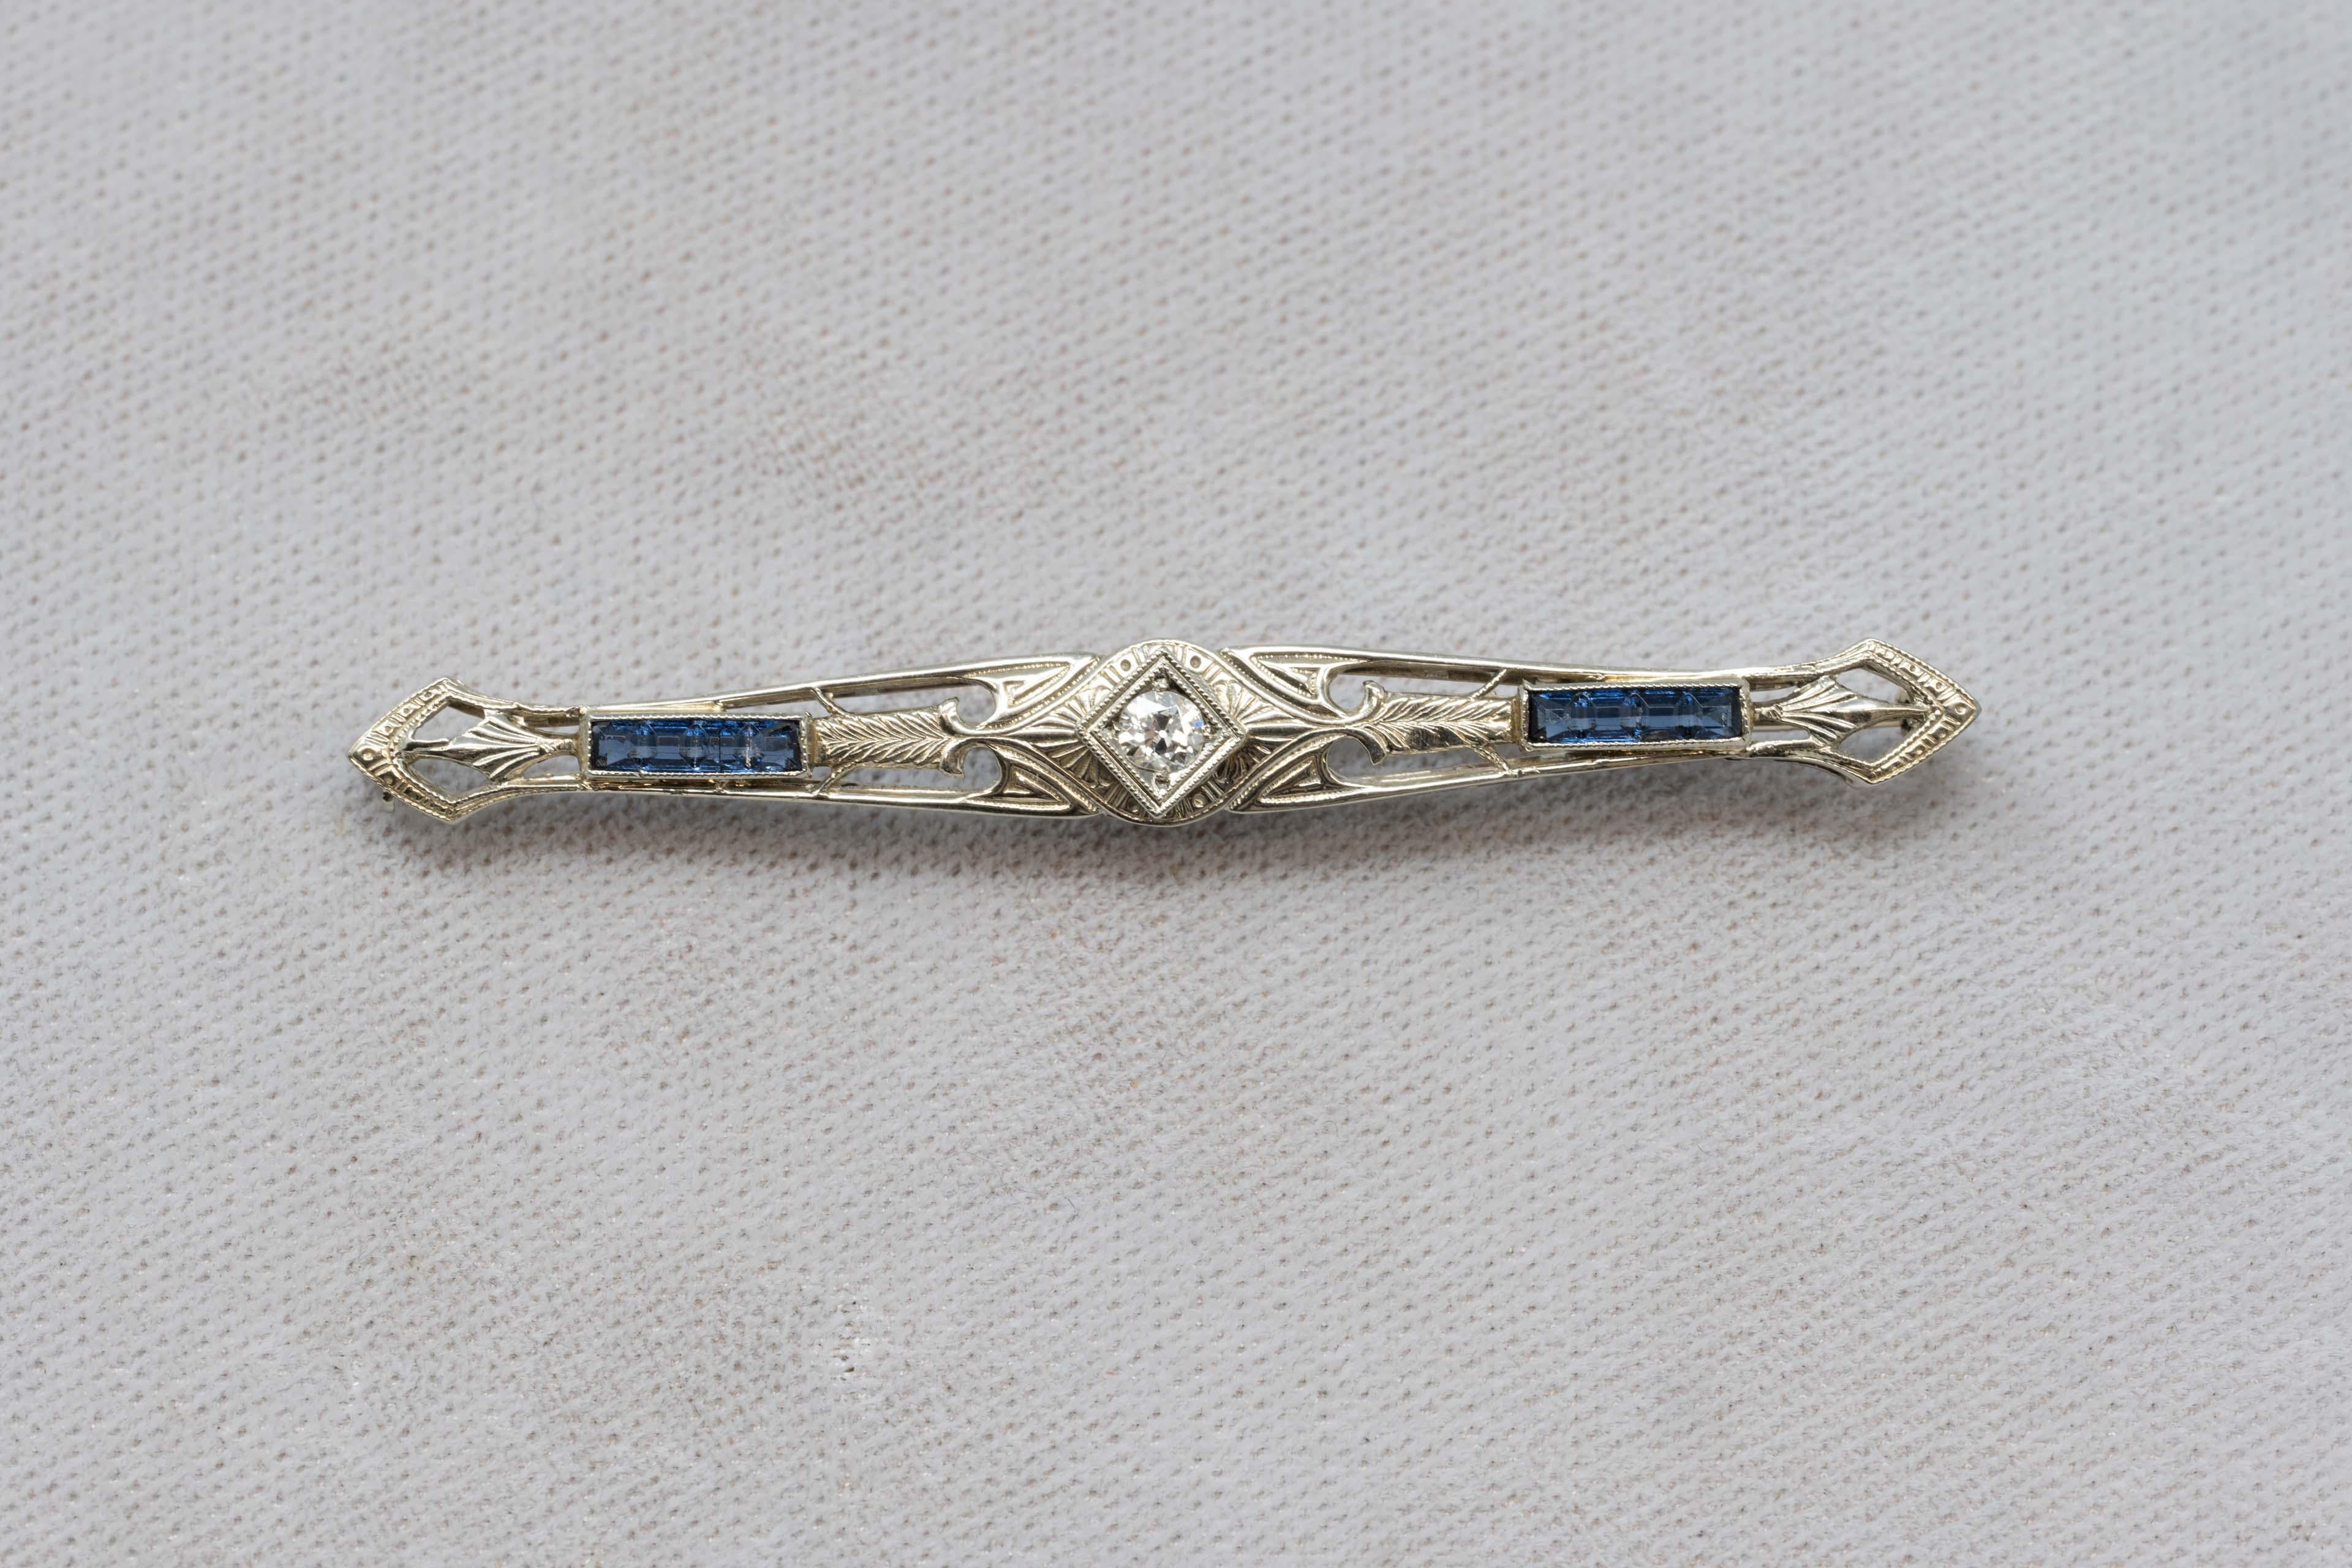 Art deco 18k white gold brooch made in the USA by Belais Manufacturing Co. Founded by David Belais 1863-1933 who was the first manufacturer of white gold in the USA. The brooch is set with diamonds of .12 ct, VS clarity and GH color plus blue